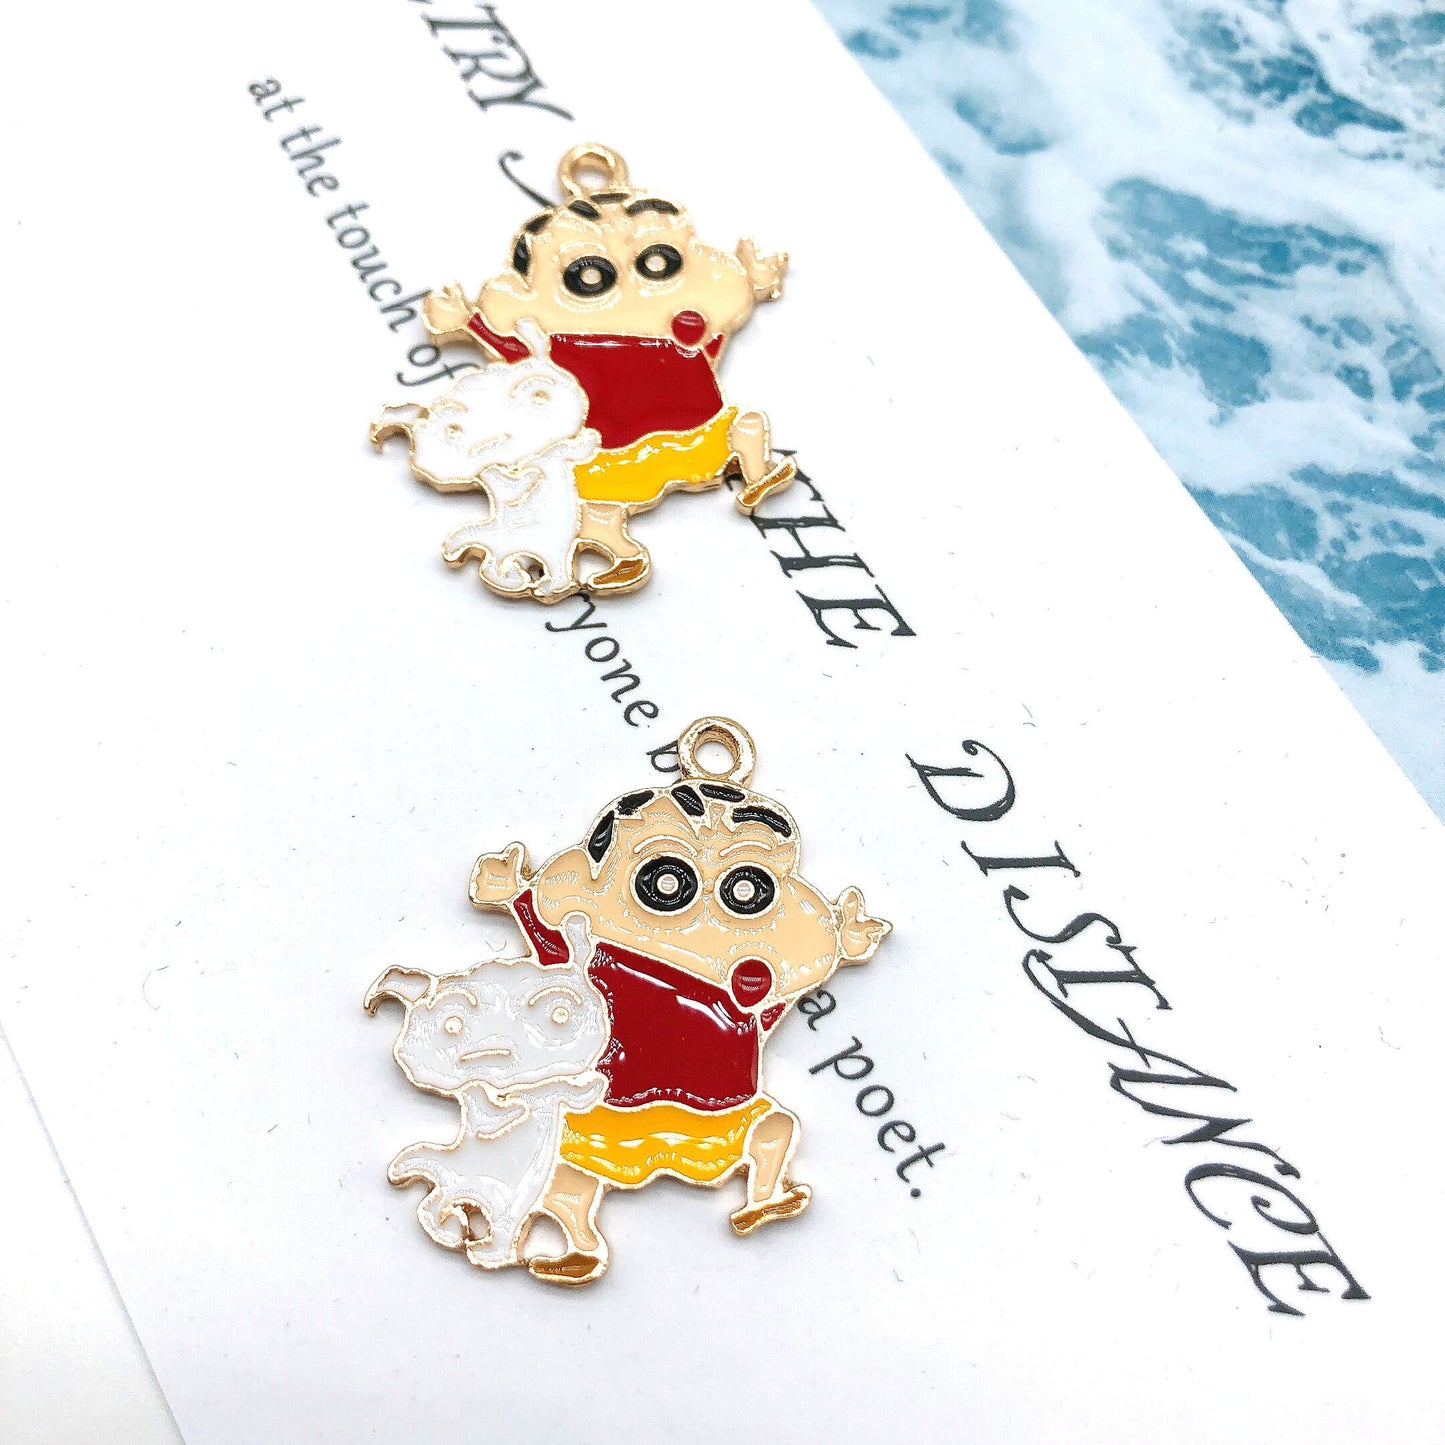 Crayon Shin-chan Metal Charms Earrings Accessories Pendant Accessories DIY